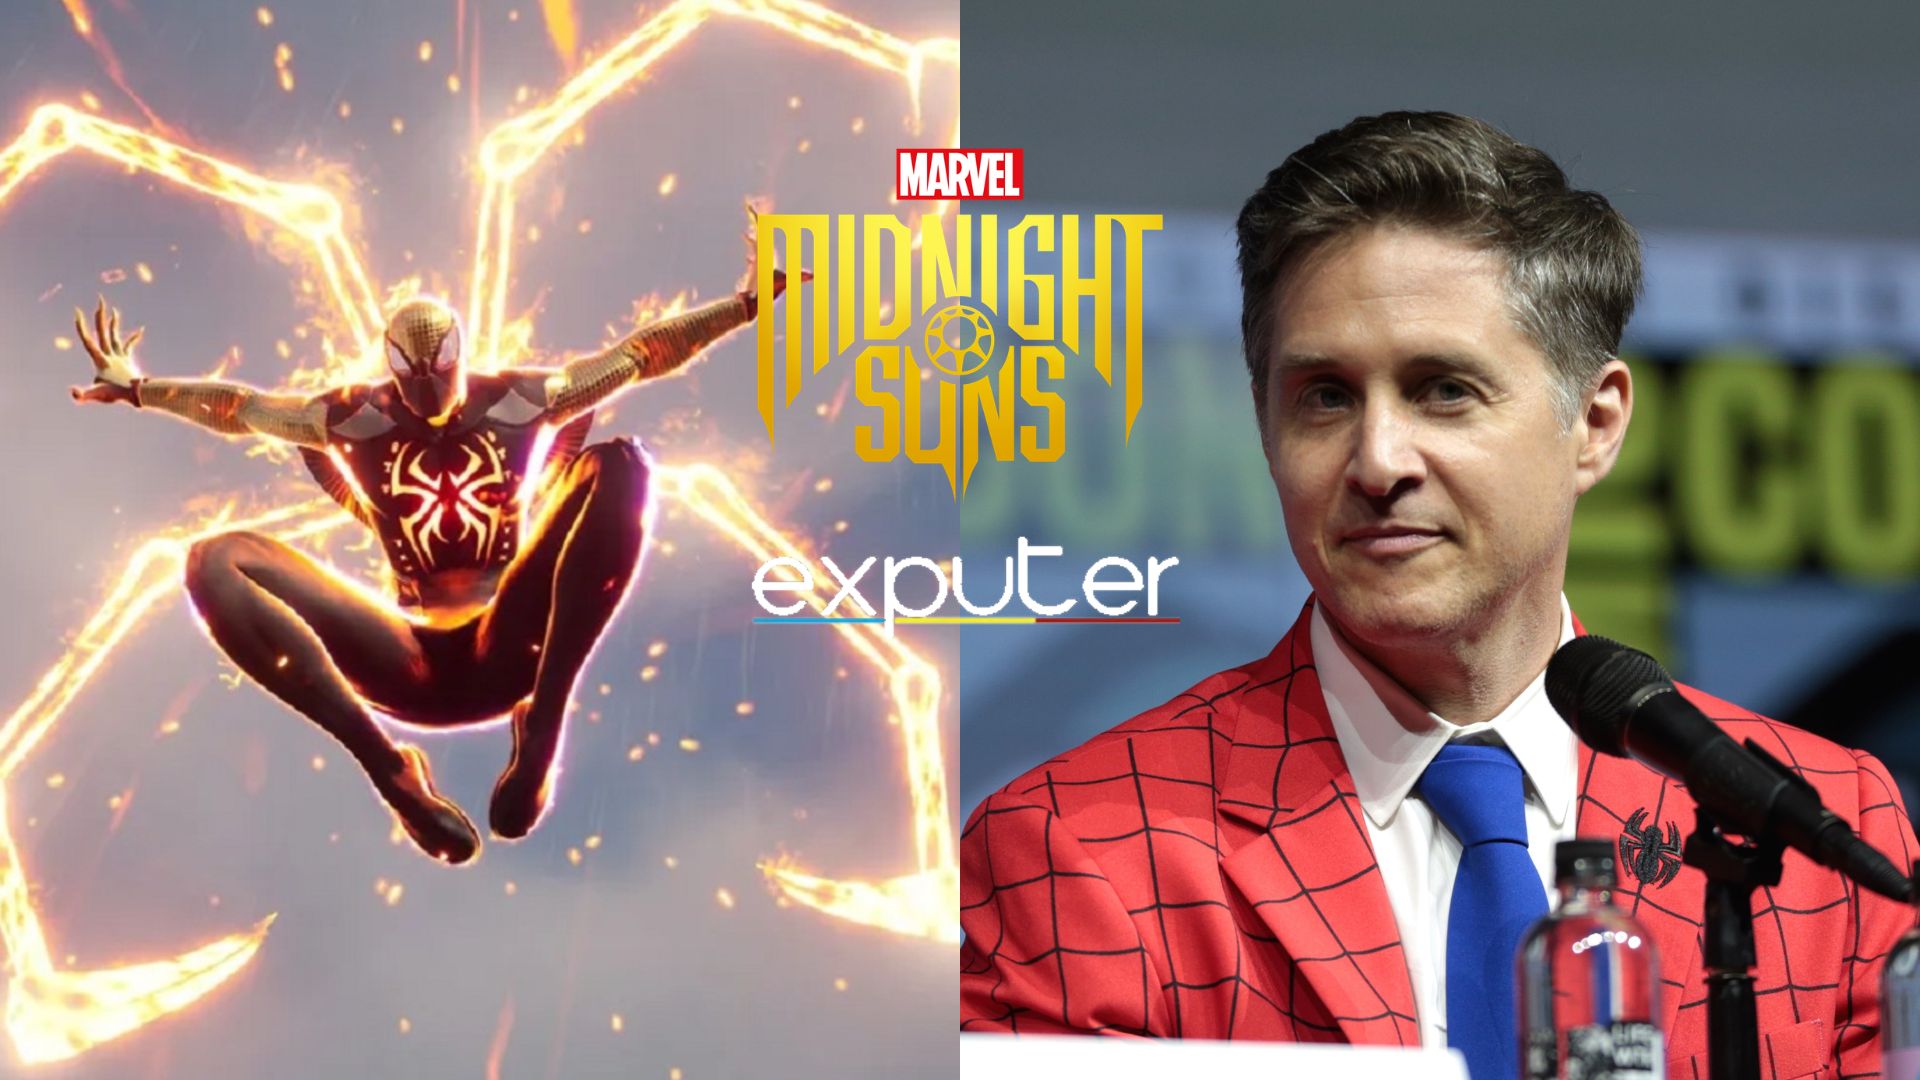 Voice Actor Yuri Lowenthal As Spider-Man Cast In Midnight Suns